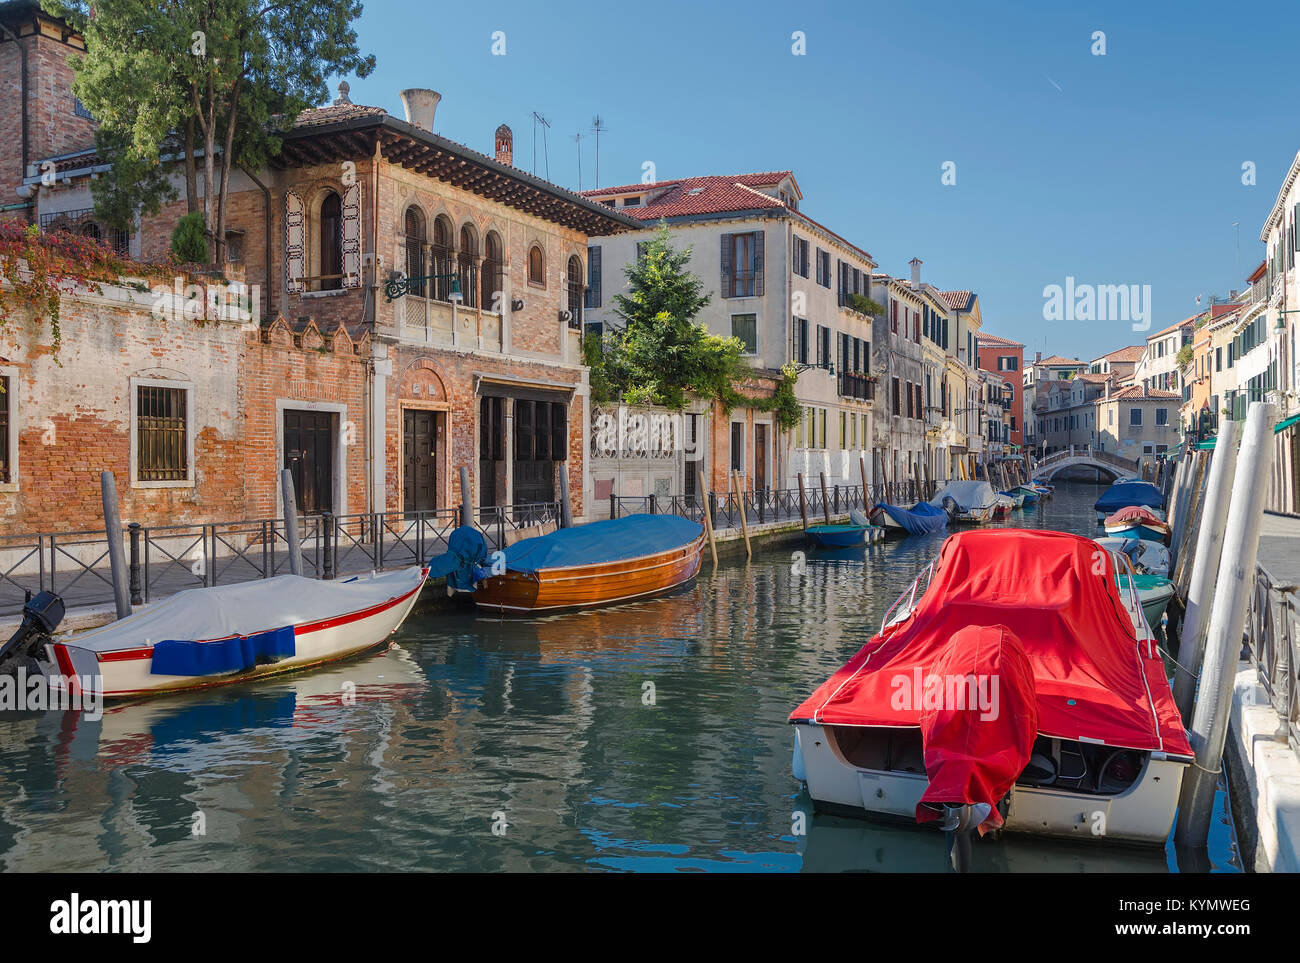 View of the canal with standing spoons and picturesque houses. Venice. Italy Stock Photo